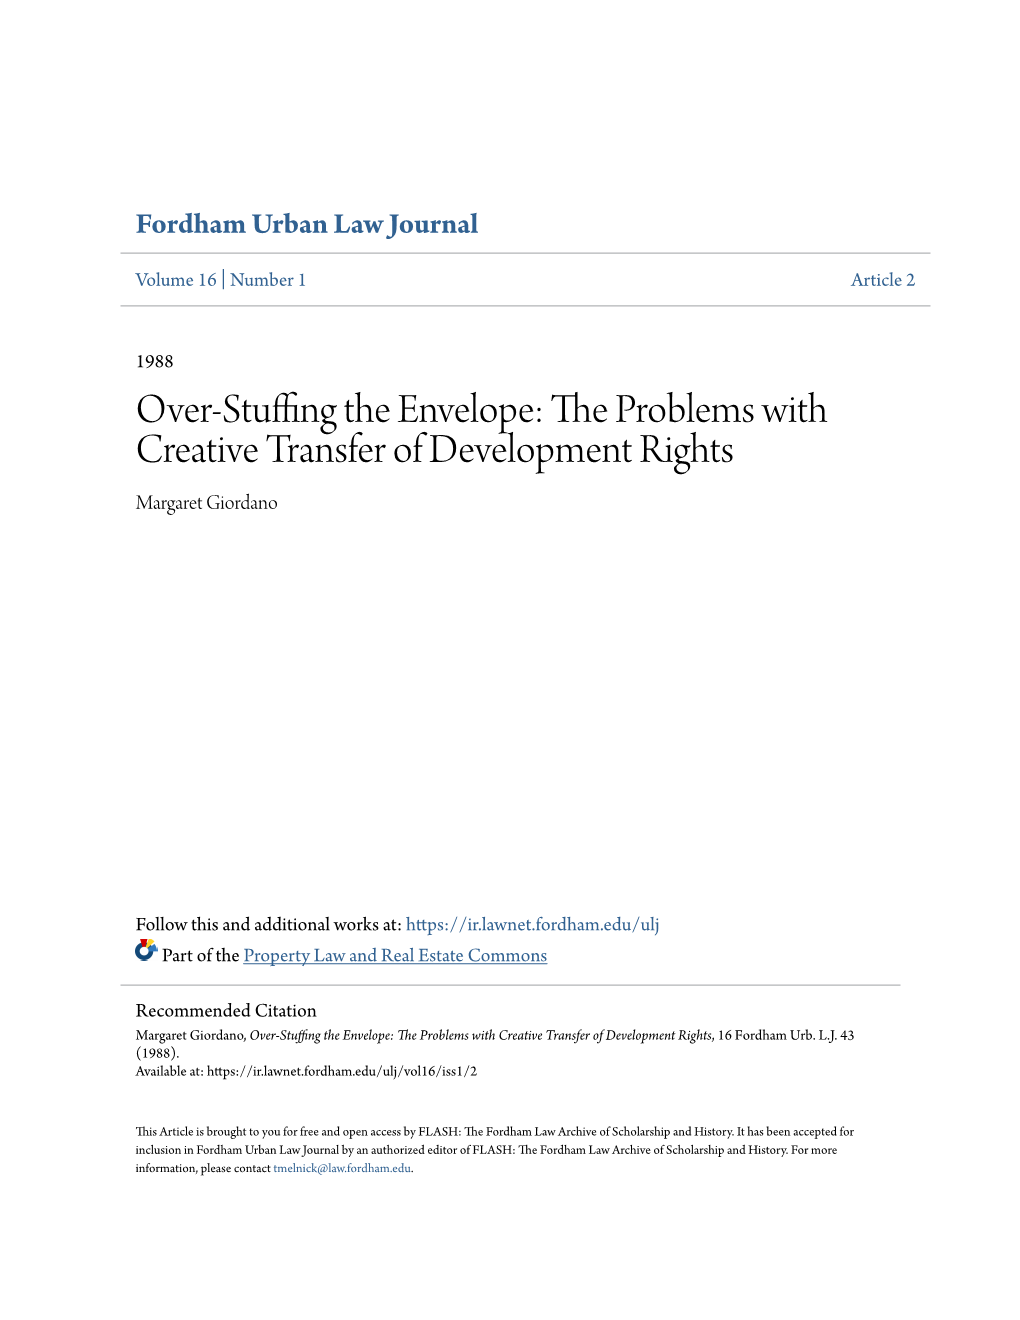 The Problems with Creative Transfer of Development Rights, 16 Fordham Urb